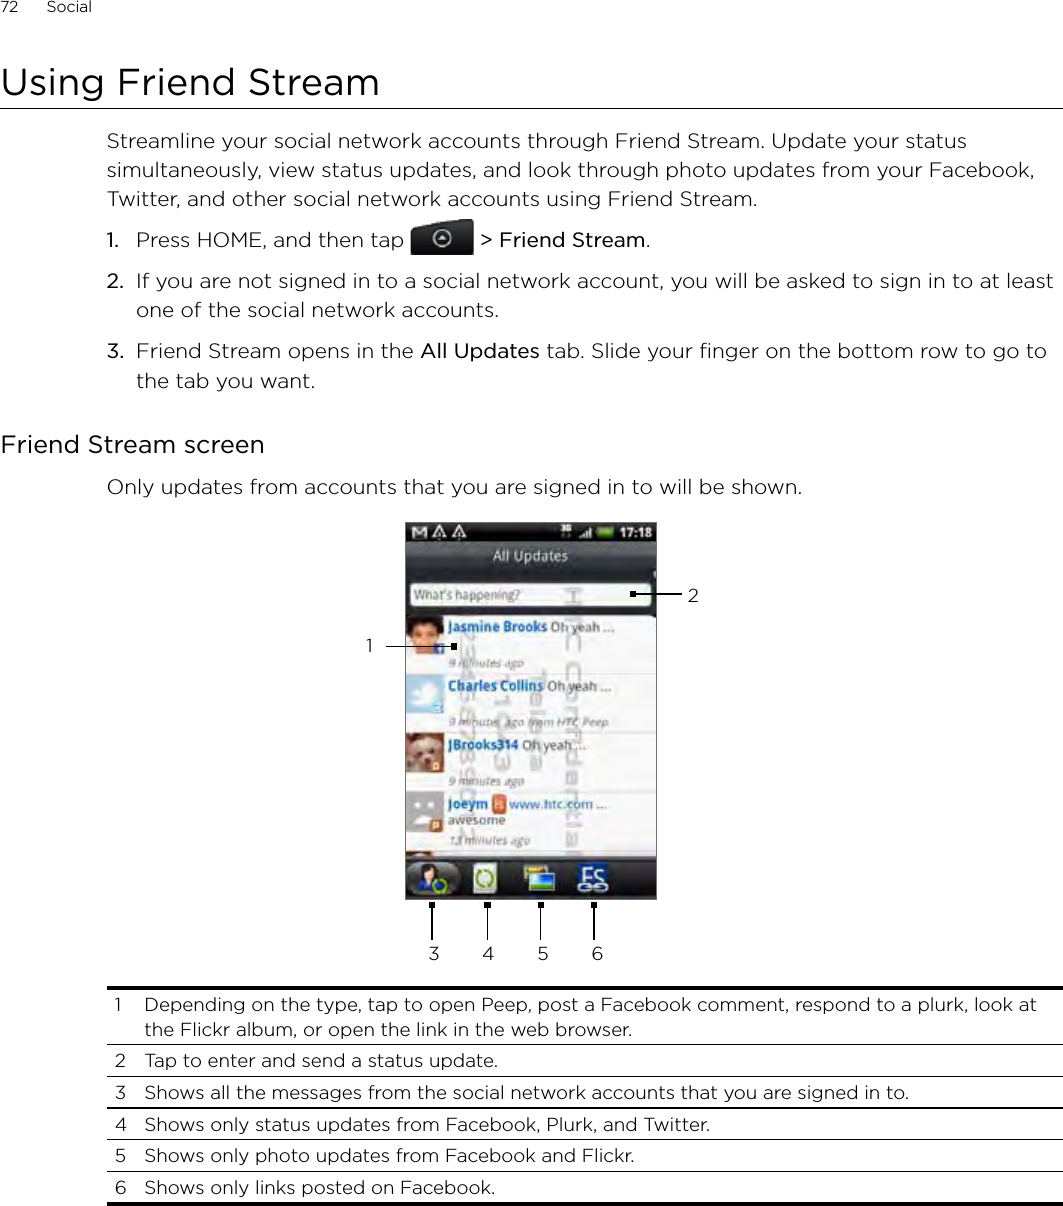 72      Social      Using Friend StreamStreamline your social network accounts through Friend Stream. Update your status simultaneously, view status updates, and look through photo updates from your Facebook, Twitter, and other social network accounts using Friend Stream. Press HOME, and then tap  &gt; Friend Stream.If you are not signed in to a social network account, you will be asked to sign in to at least one of the social network accounts.3.  Friend Stream opens in the All Updates tab. Slide your finger on the bottom row to go to the tab you want.Friend Stream screenOnly updates from accounts that you are signed in to will be shown.  23 4 5 611  Depending on the type, tap to open Peep, post a Facebook comment, respond to a plurk, look at the Flickr album, or open the link in the web browser. 2  Tap to enter and send a status update. 3  Shows all the messages from the social network accounts that you are signed in to.   4  Shows only status updates from Facebook, Plurk, and Twitter. 5  Shows only photo updates from Facebook and Flickr. 6  Shows only links posted on Facebook. 1.2.